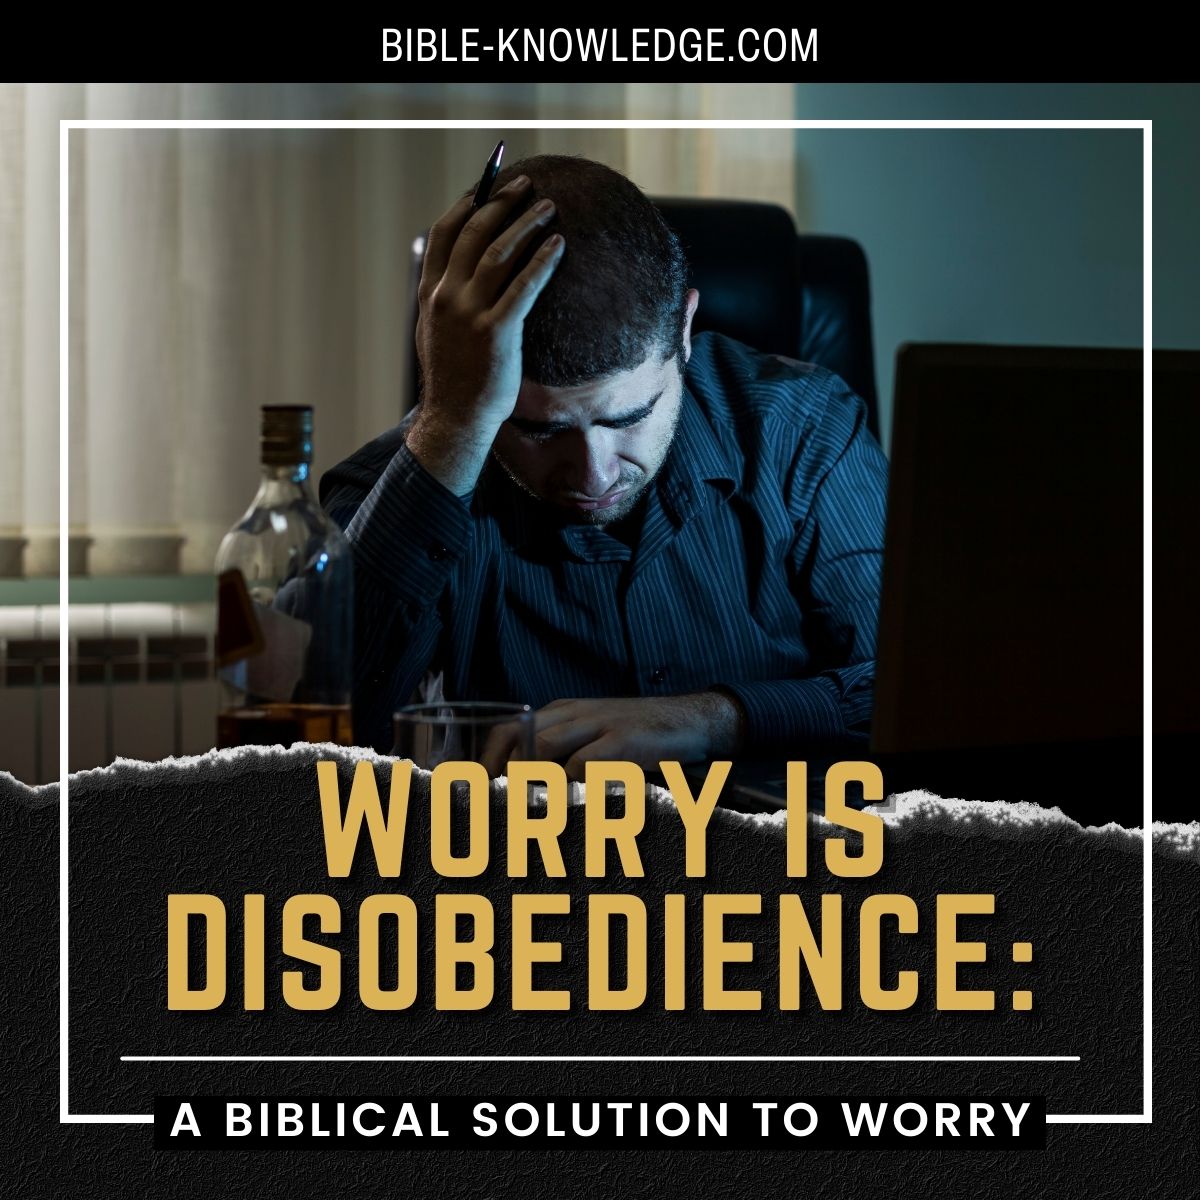 A Biblical Solution to Worry